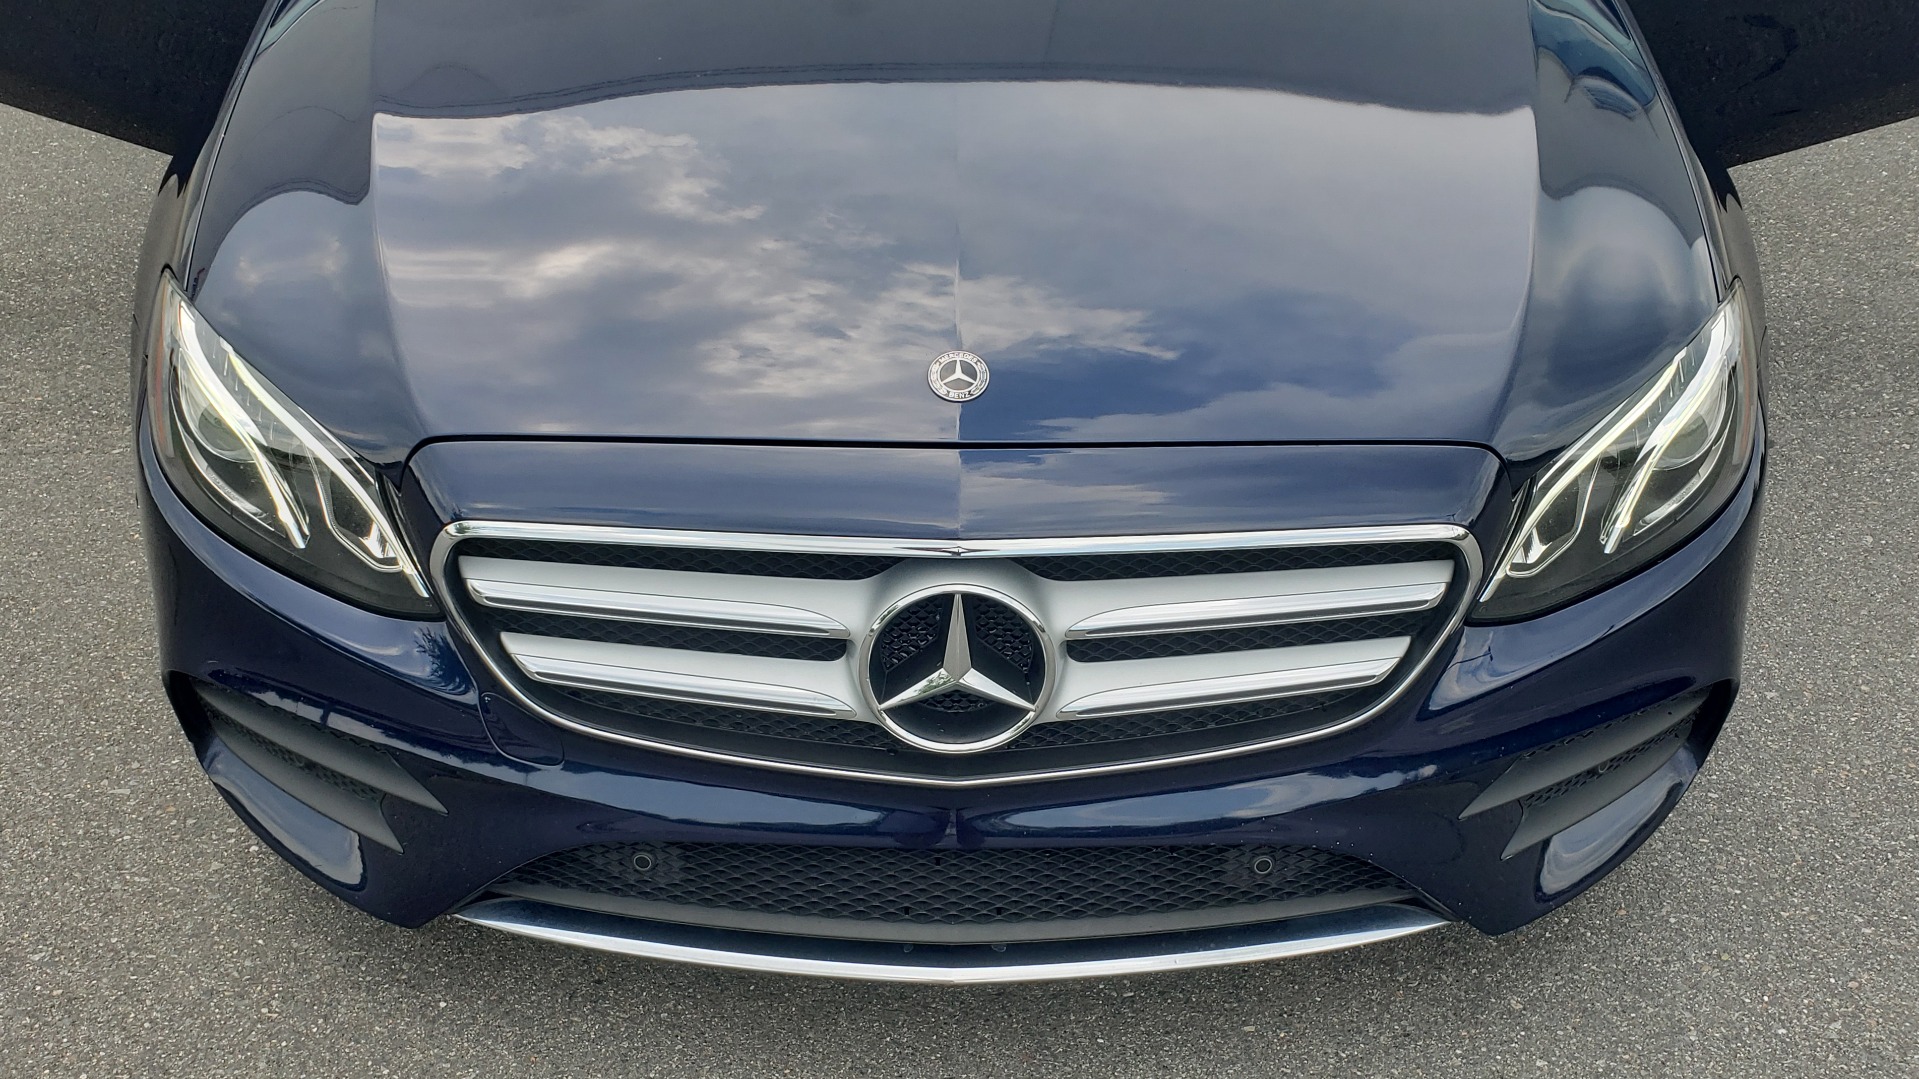 Used 2018 Mercedes-Benz E-CLASS E 300 PREMIUM / AMG LINE / PARK ASST / BURMESTER / SUNROOF / REARVIEW for sale Sold at Formula Imports in Charlotte NC 28227 24